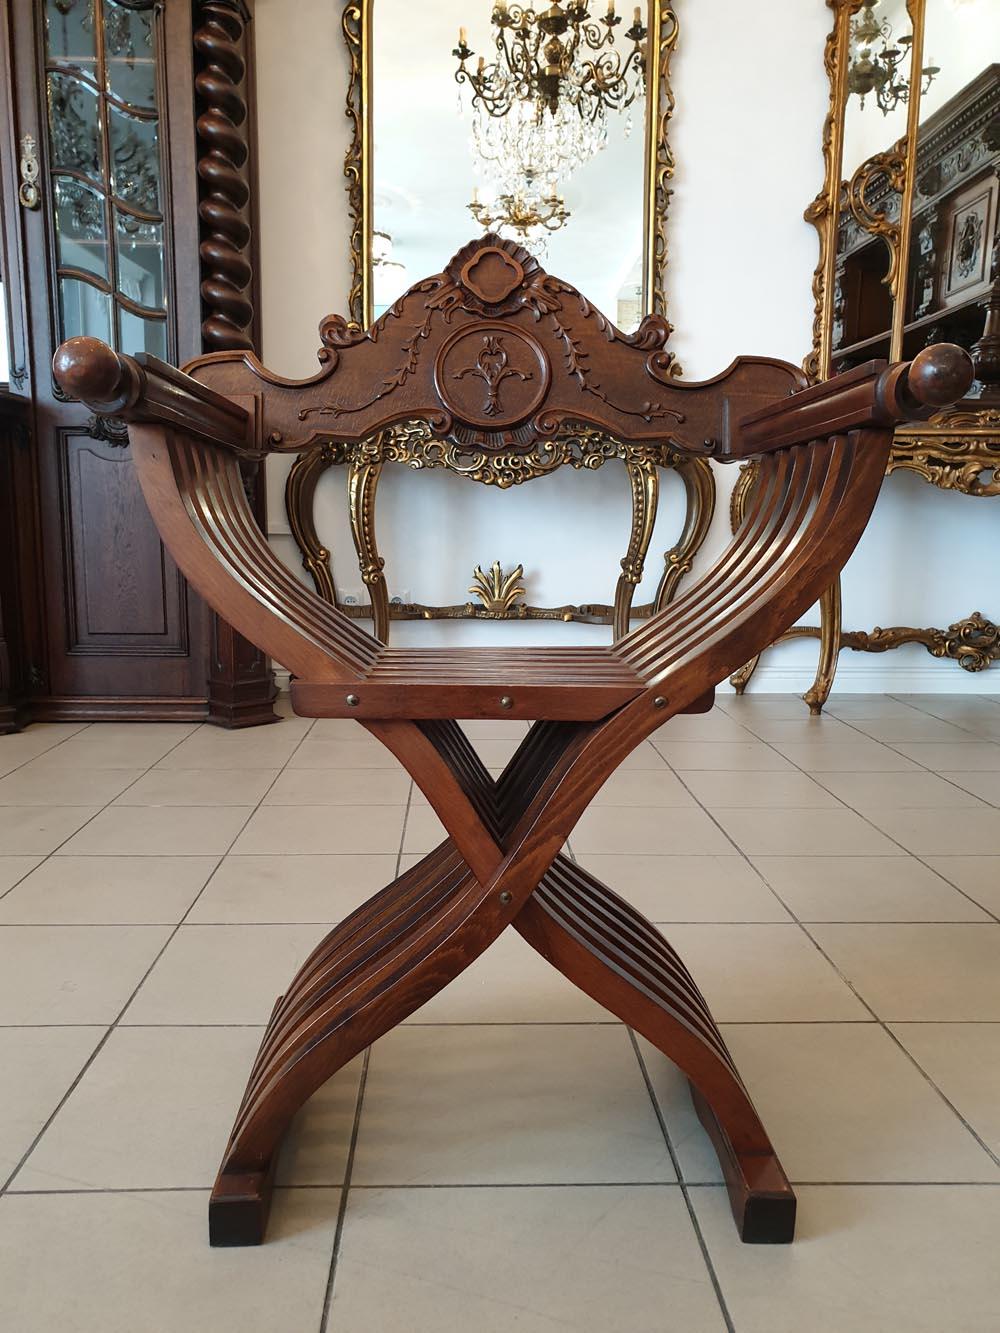 An interesting, effective and very decorative object - Sella Curulis - so-called curule chair, i.e. a scissor-folding chair - an armchair, which has mainly decorative functions today.
A curule seat is a design of chair noted for its uses in Ancient